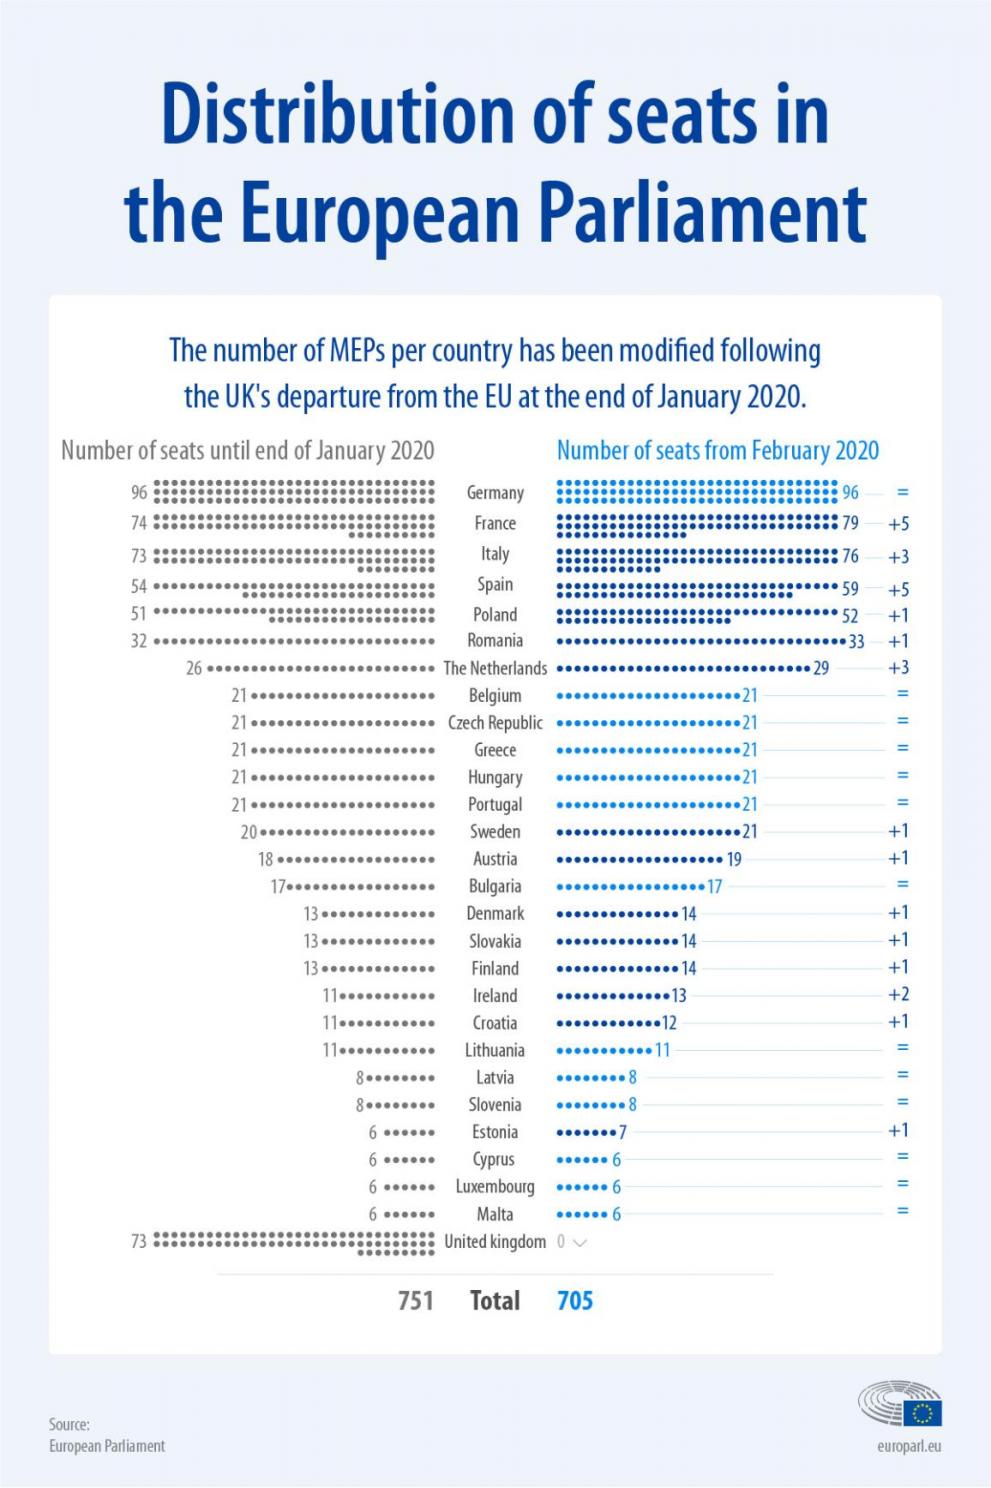 How many seats does each country get in in the European Parliament?